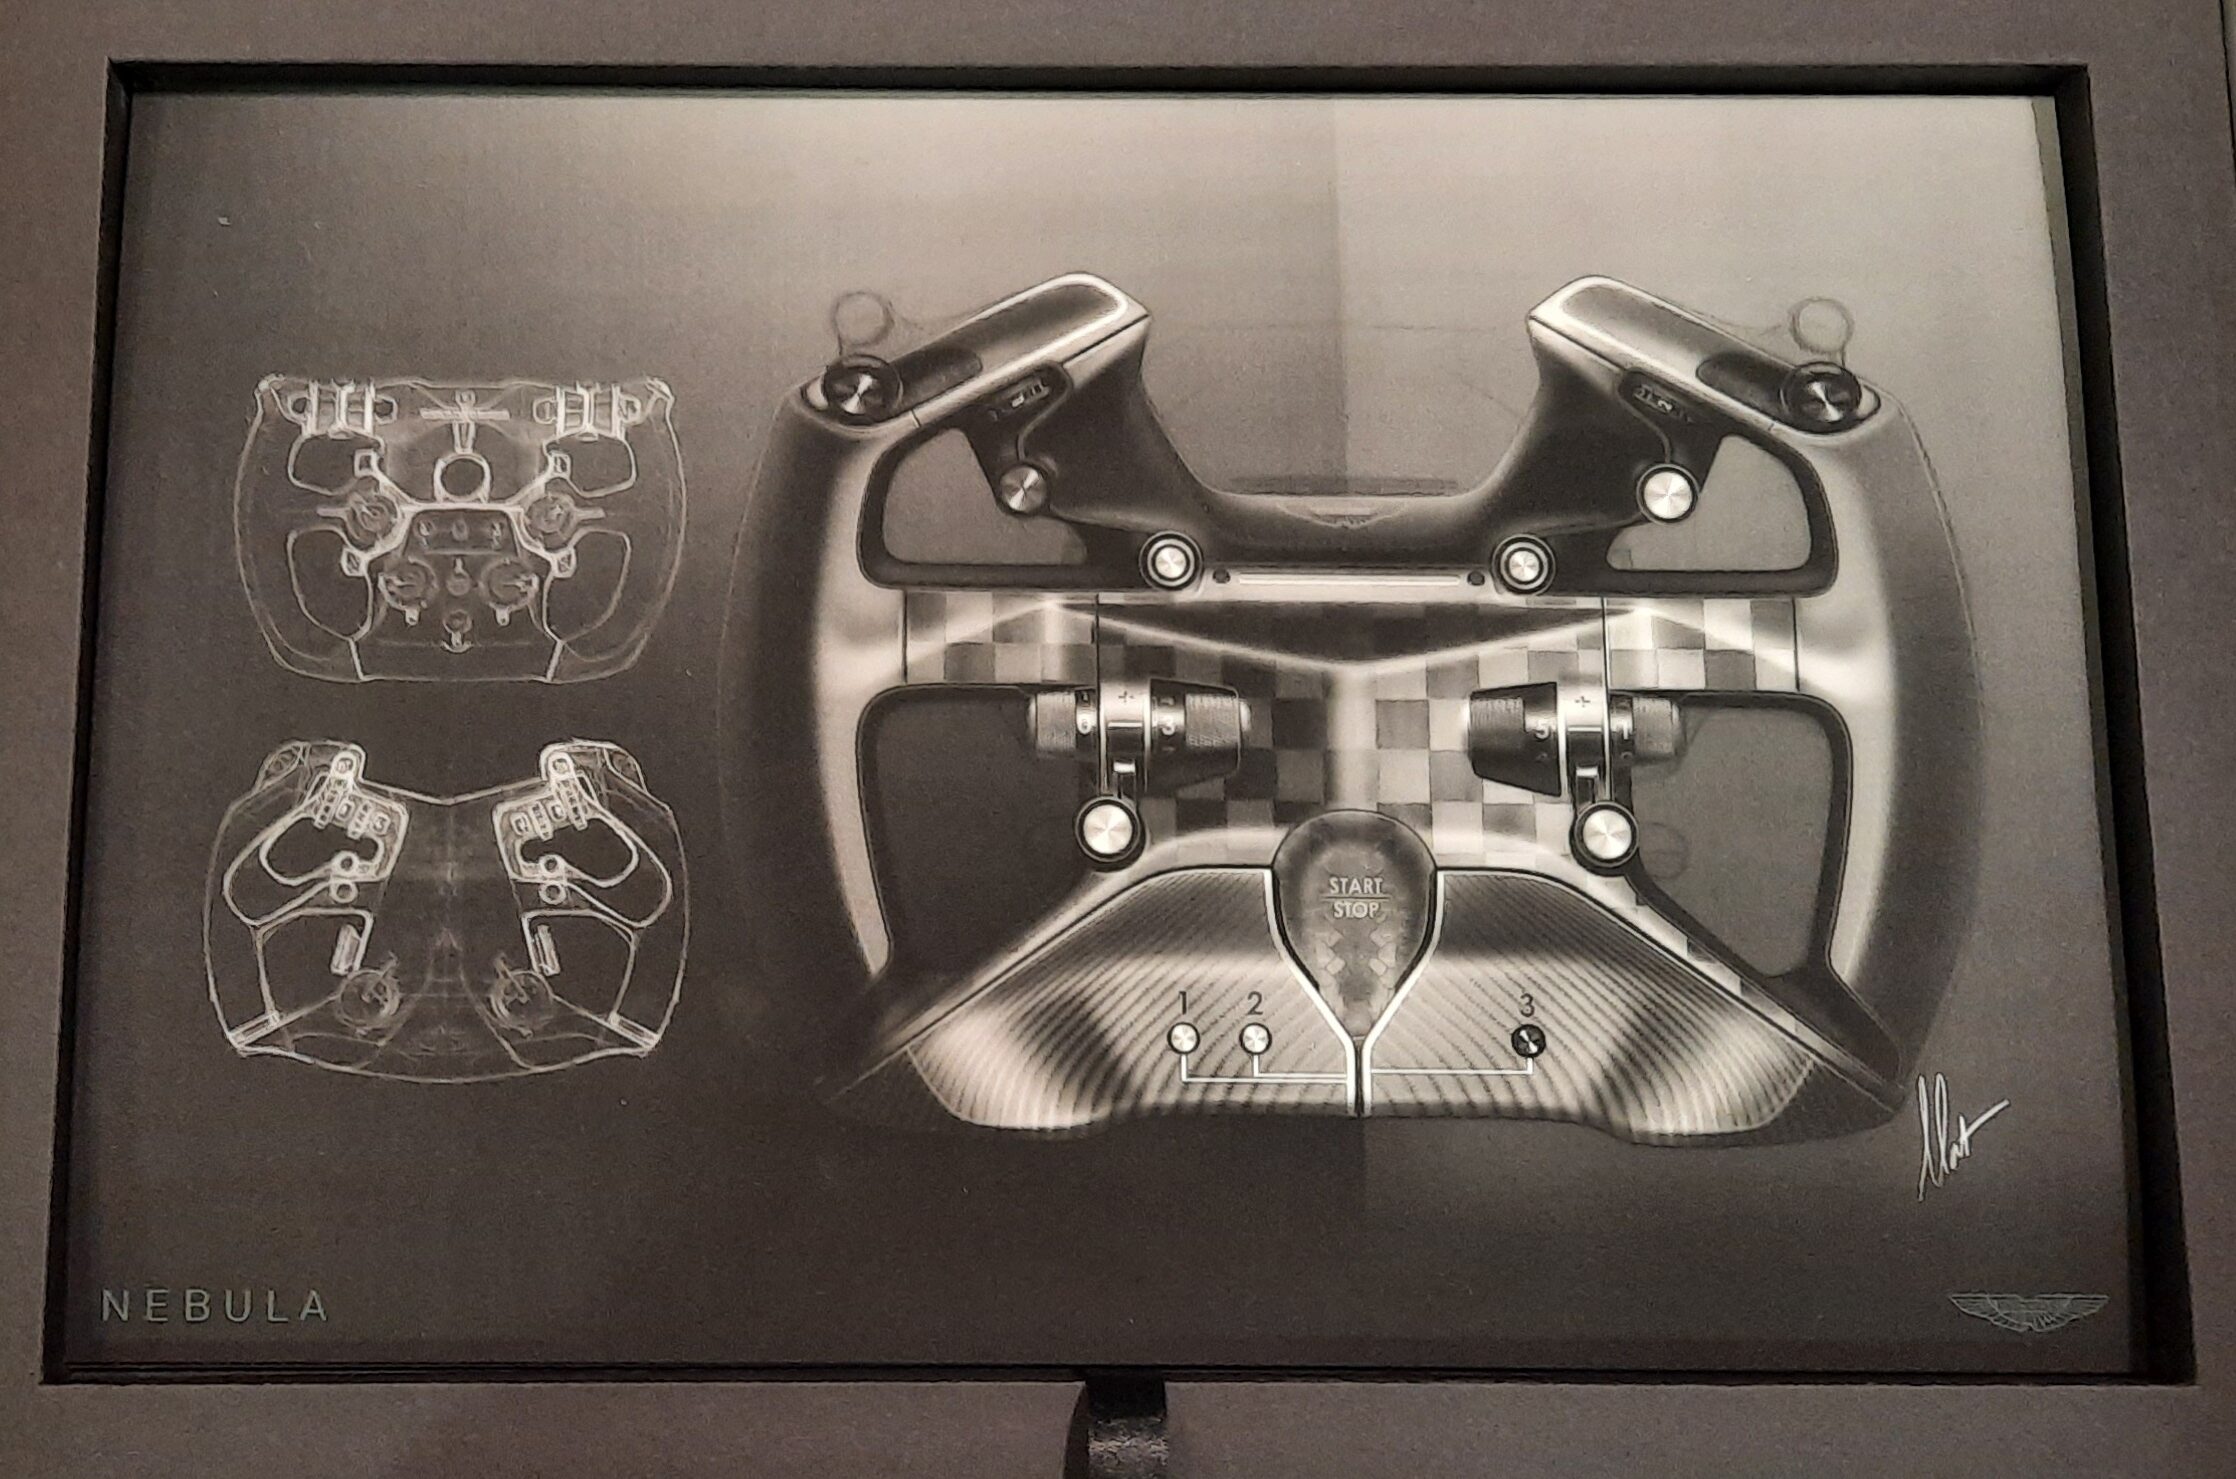 A card from the Nebula Collaboration Presentation Box showing drawings for the steering wheel